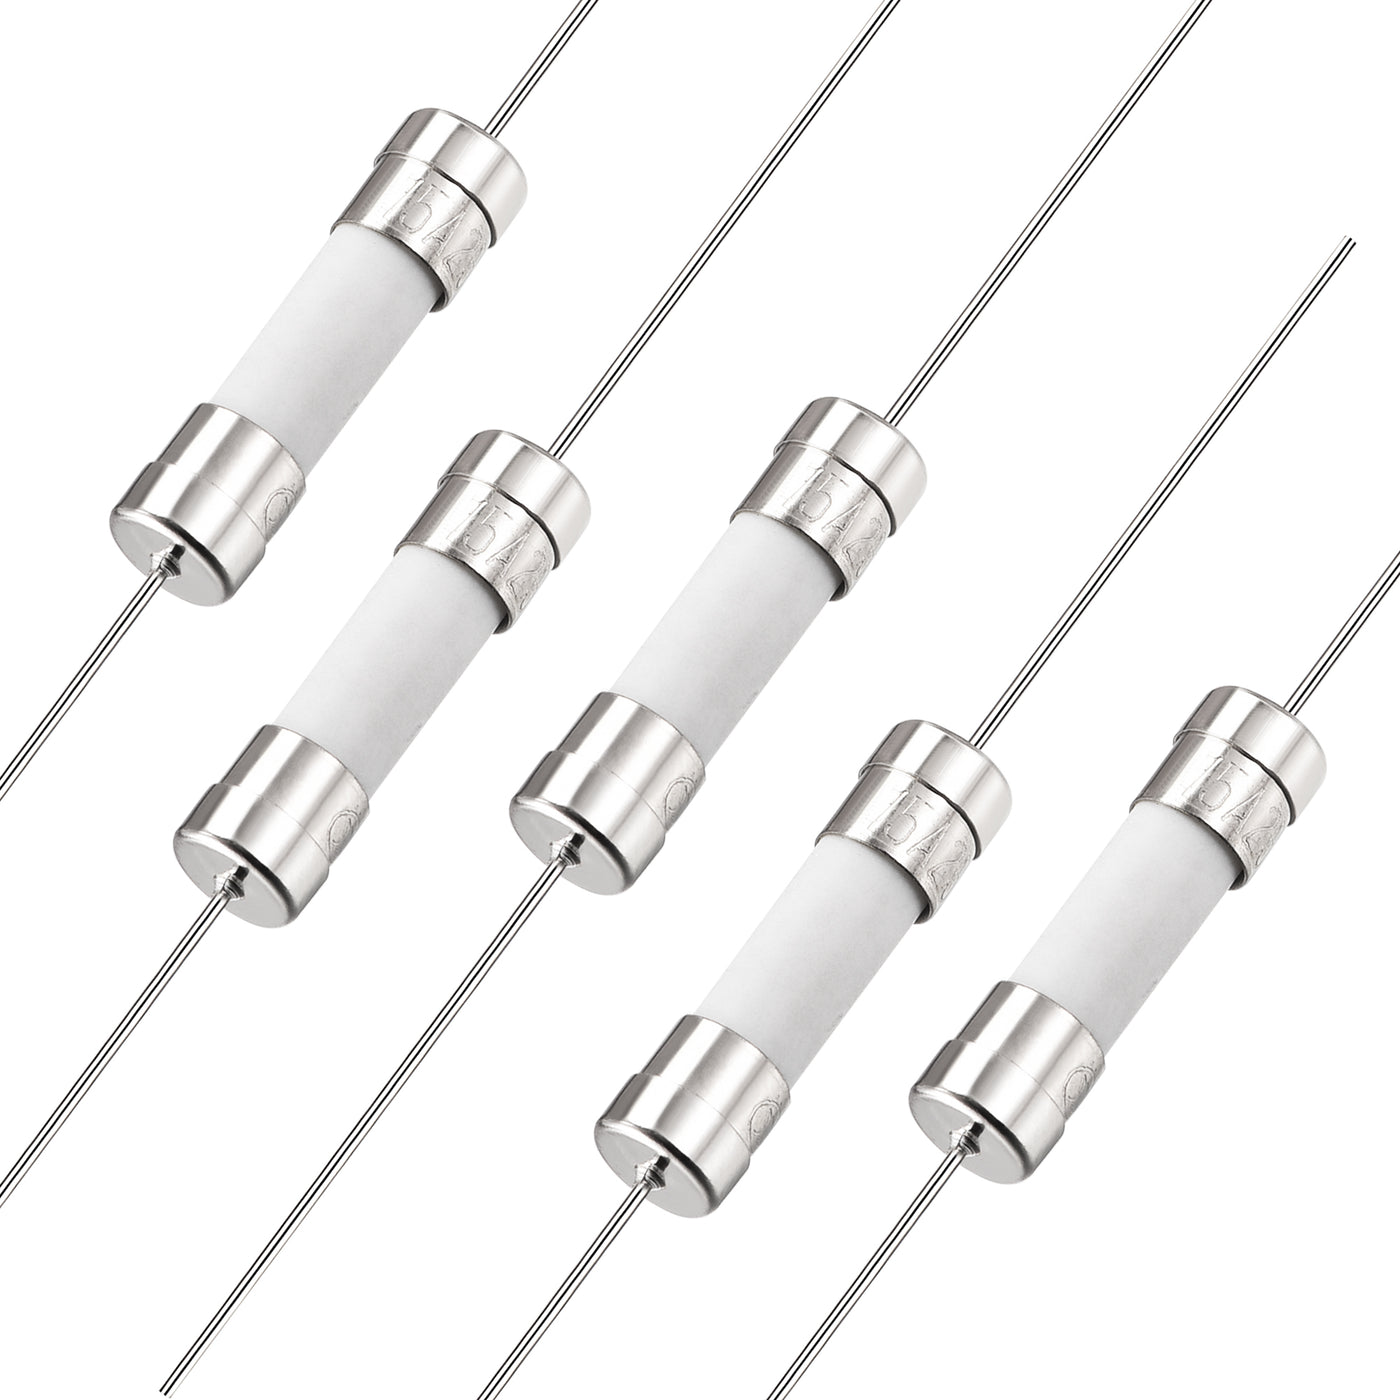 uxcell Uxcell Fast Blow Fuse Lead Wire Ceramic Fuses 5mm x 20mm 250V F15A 5Pcs